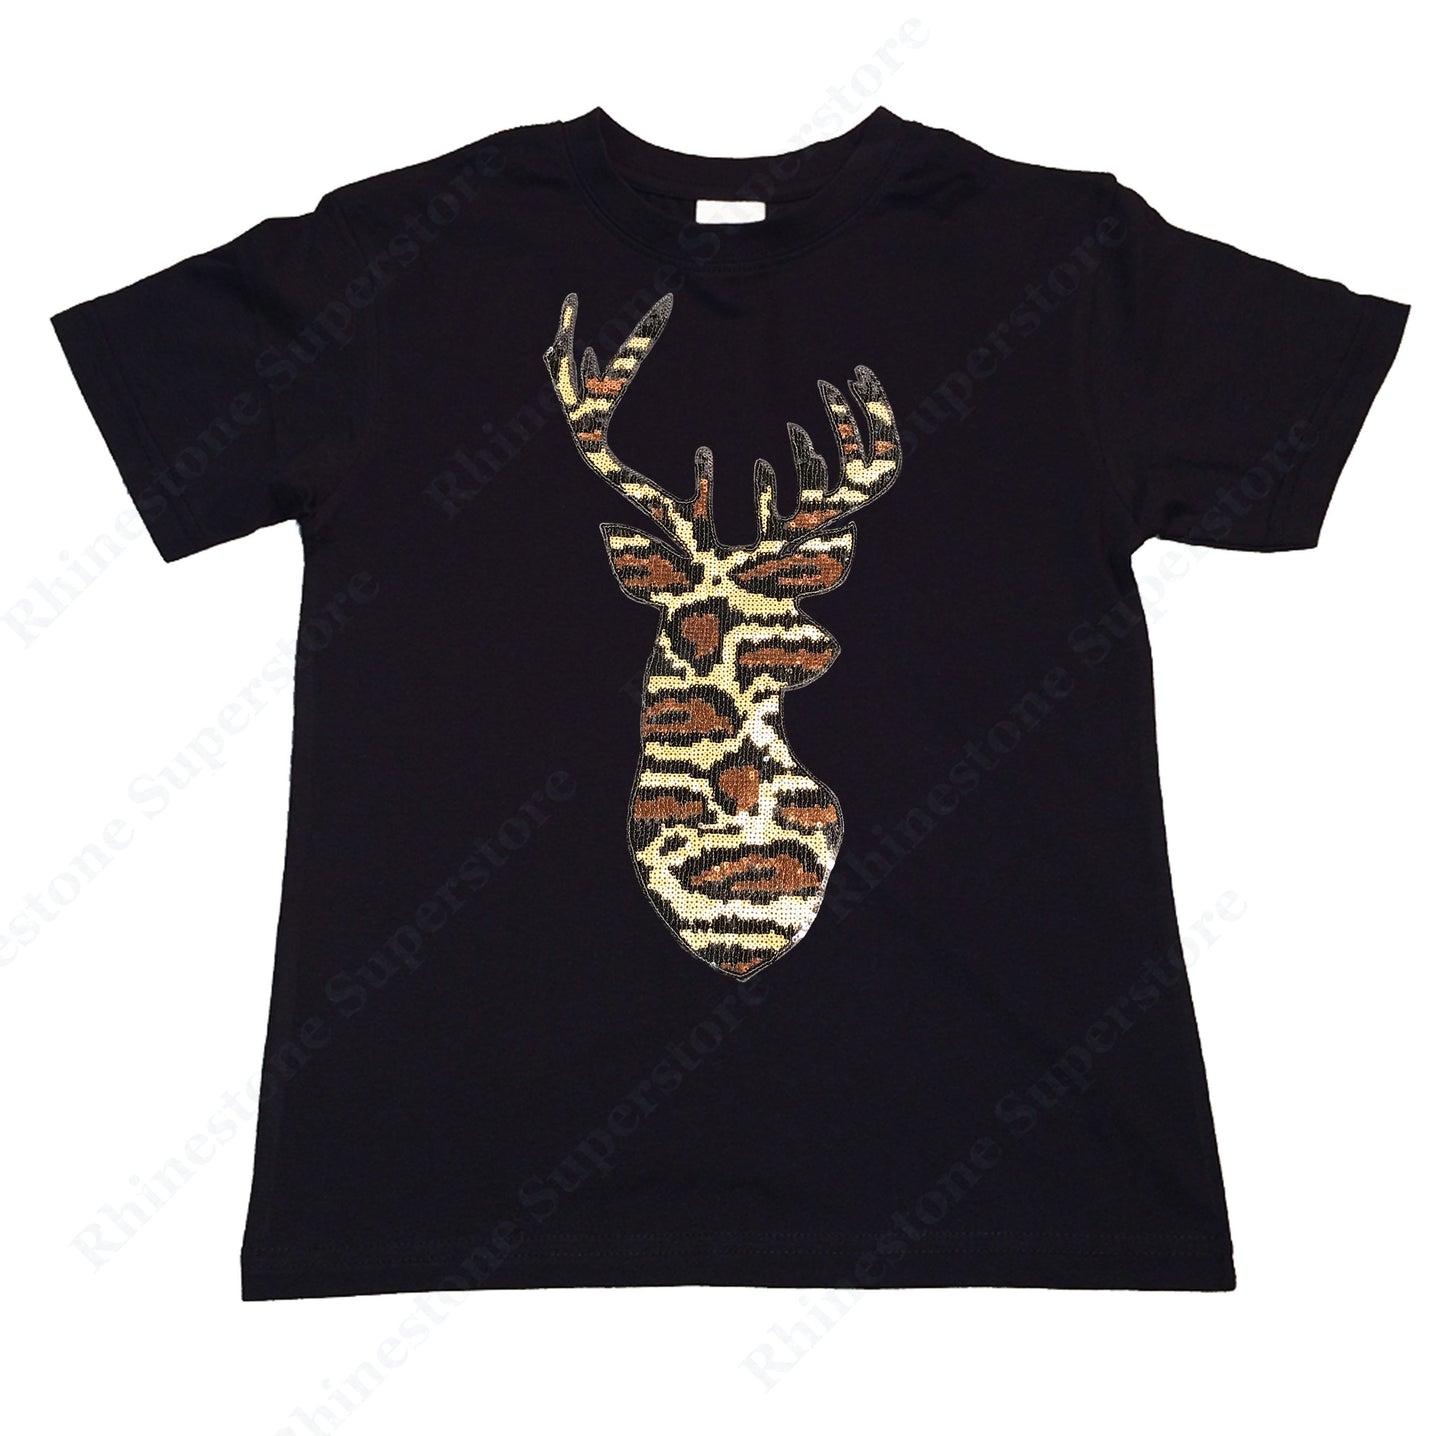 Girls Rhinestone T-Shirt " Leopard Print Reindeer in Sequence " Kids Size 3 to 14 Available